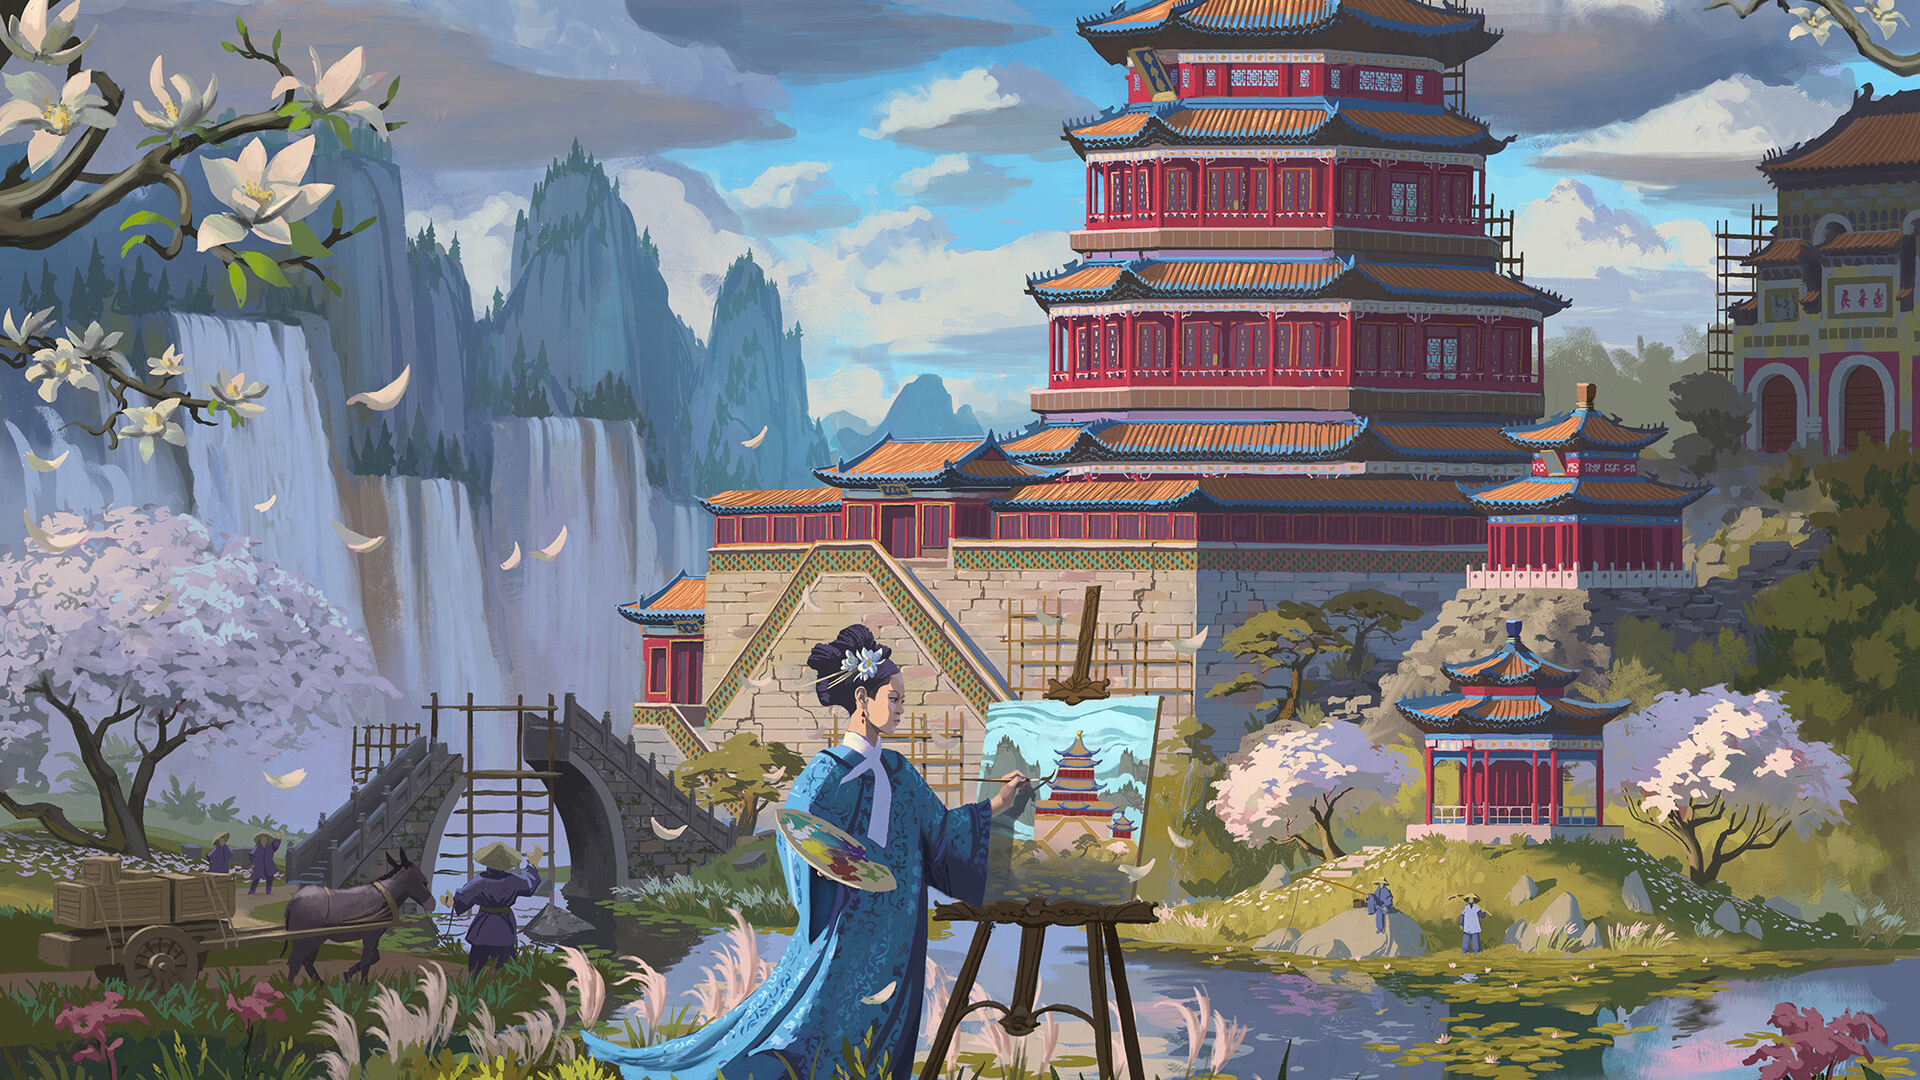 General 1920x1080 landscape digital art nature sky Asian Asian architecture water petals canvas temple grass flowers dress clouds animals waterfall branch China Chinese architecture Chinese clothing magnolia